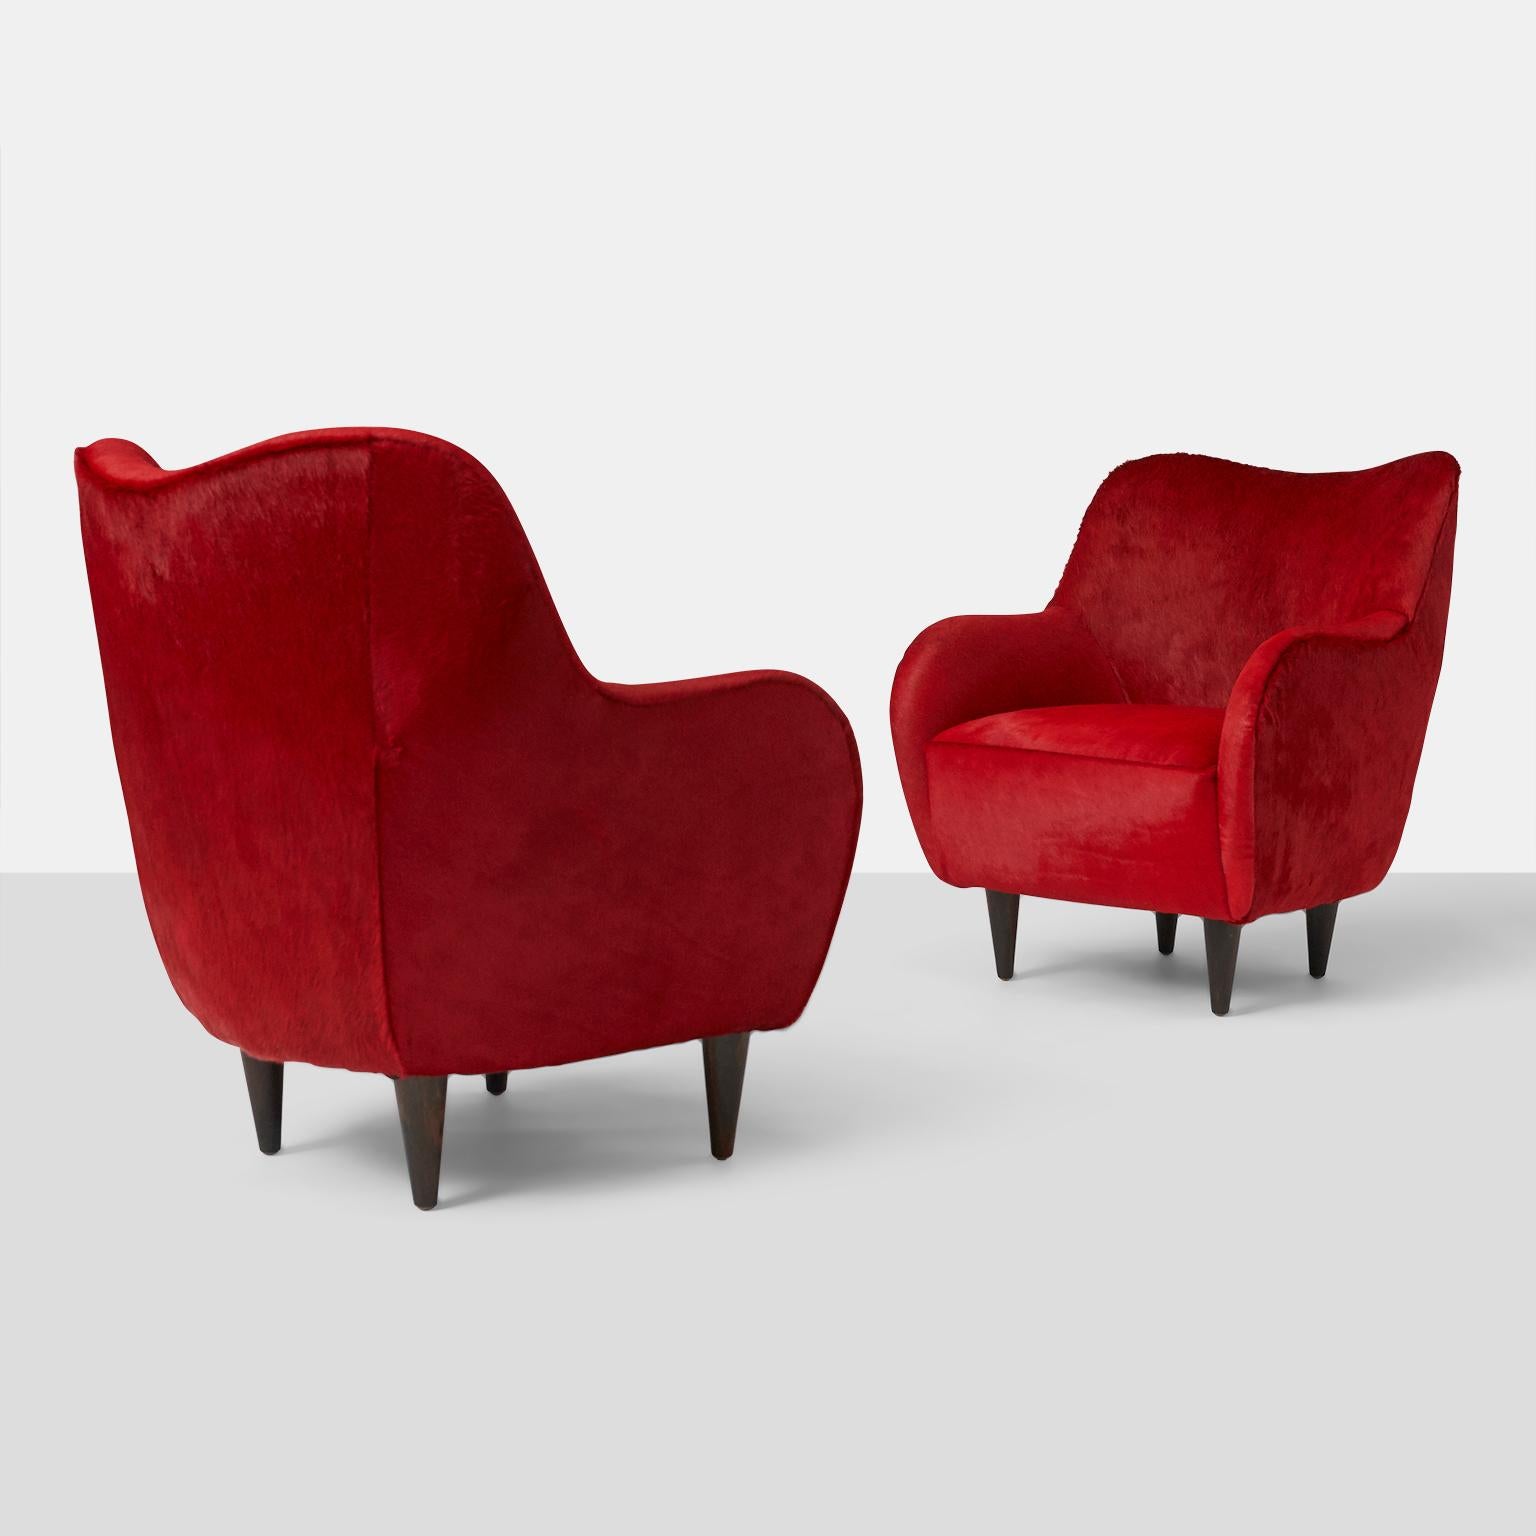 Pair of club chairs by Joaquim Tenreiro
A rare pair of club chairs by Joaquim Tenreiro completely restored in a deep red hair on hide with tapered wood legs.
Brazil, circa 1950s.